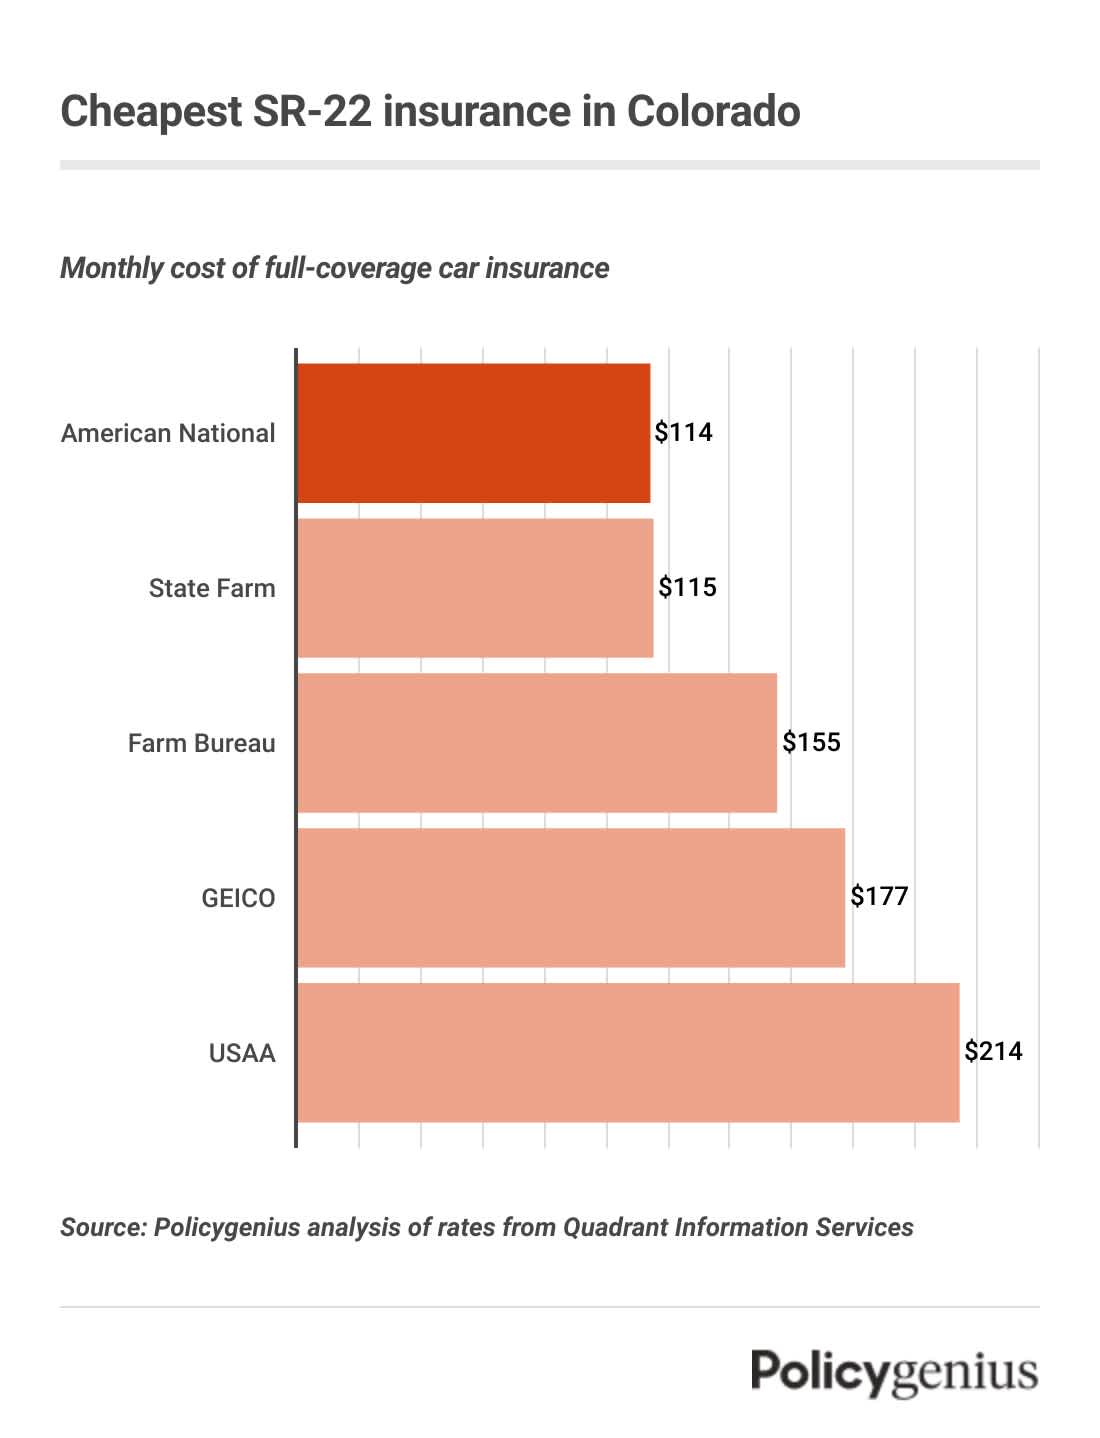 A bar graph showing the companies with the cheapest SR-22 insurance in Colorado. The cheapest company is American National.